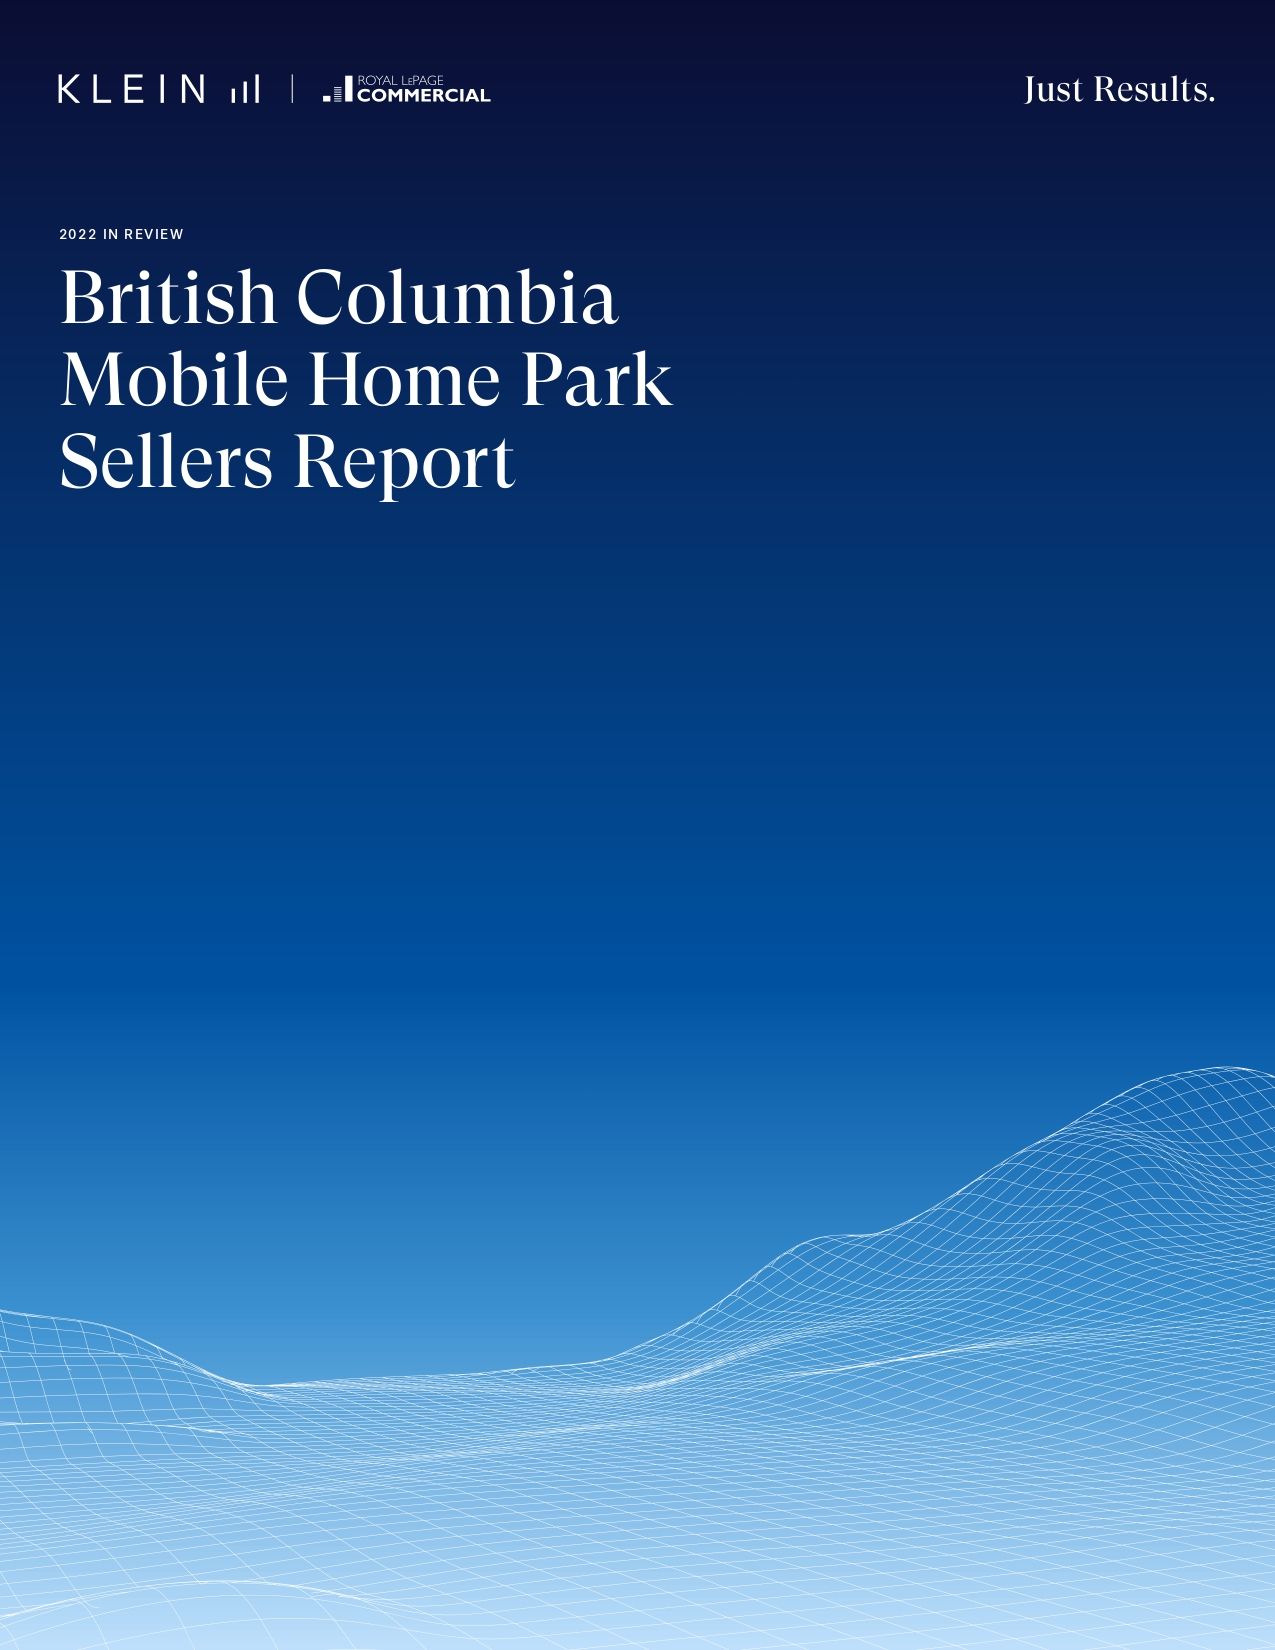 MHP Sellers Report Cover